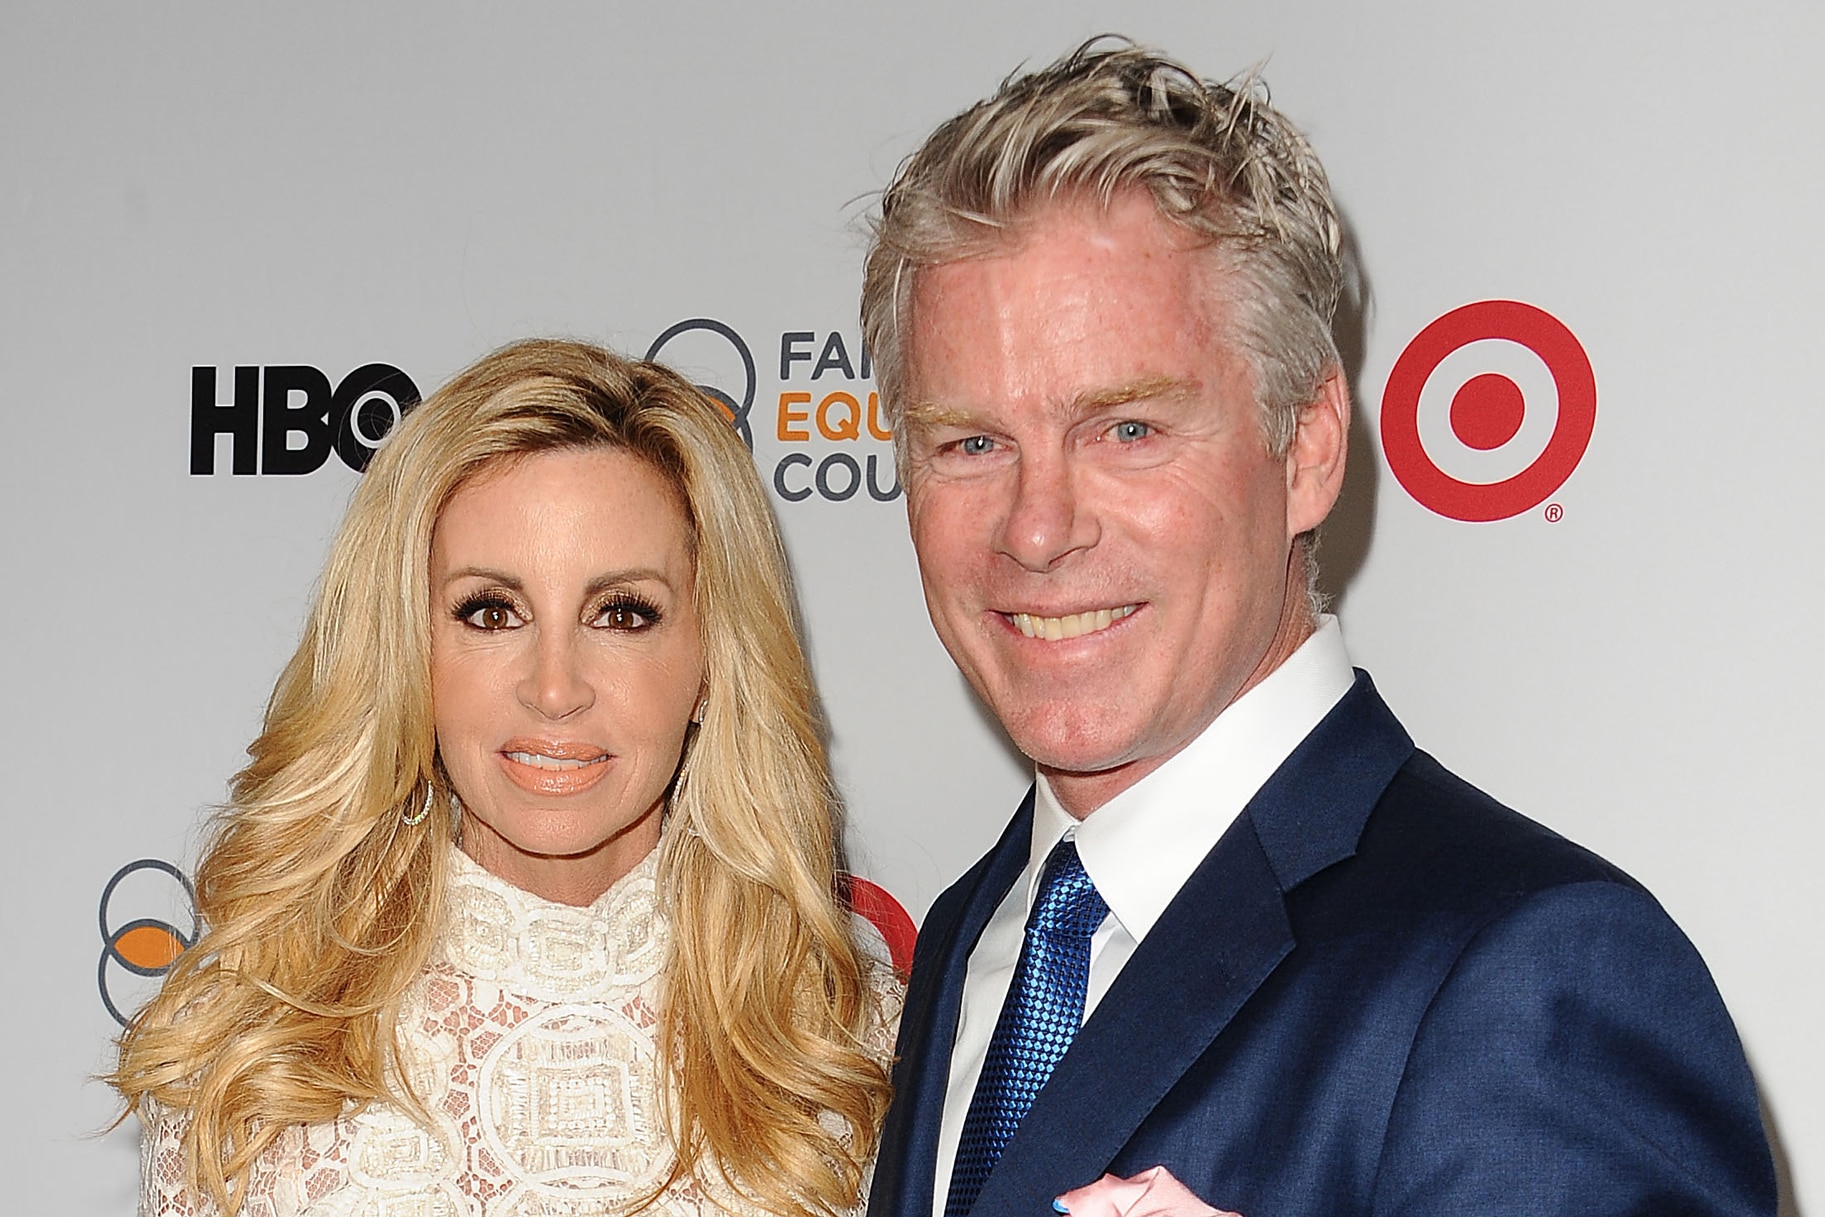 Camille Grammer Reveals All About Her Fiancé.